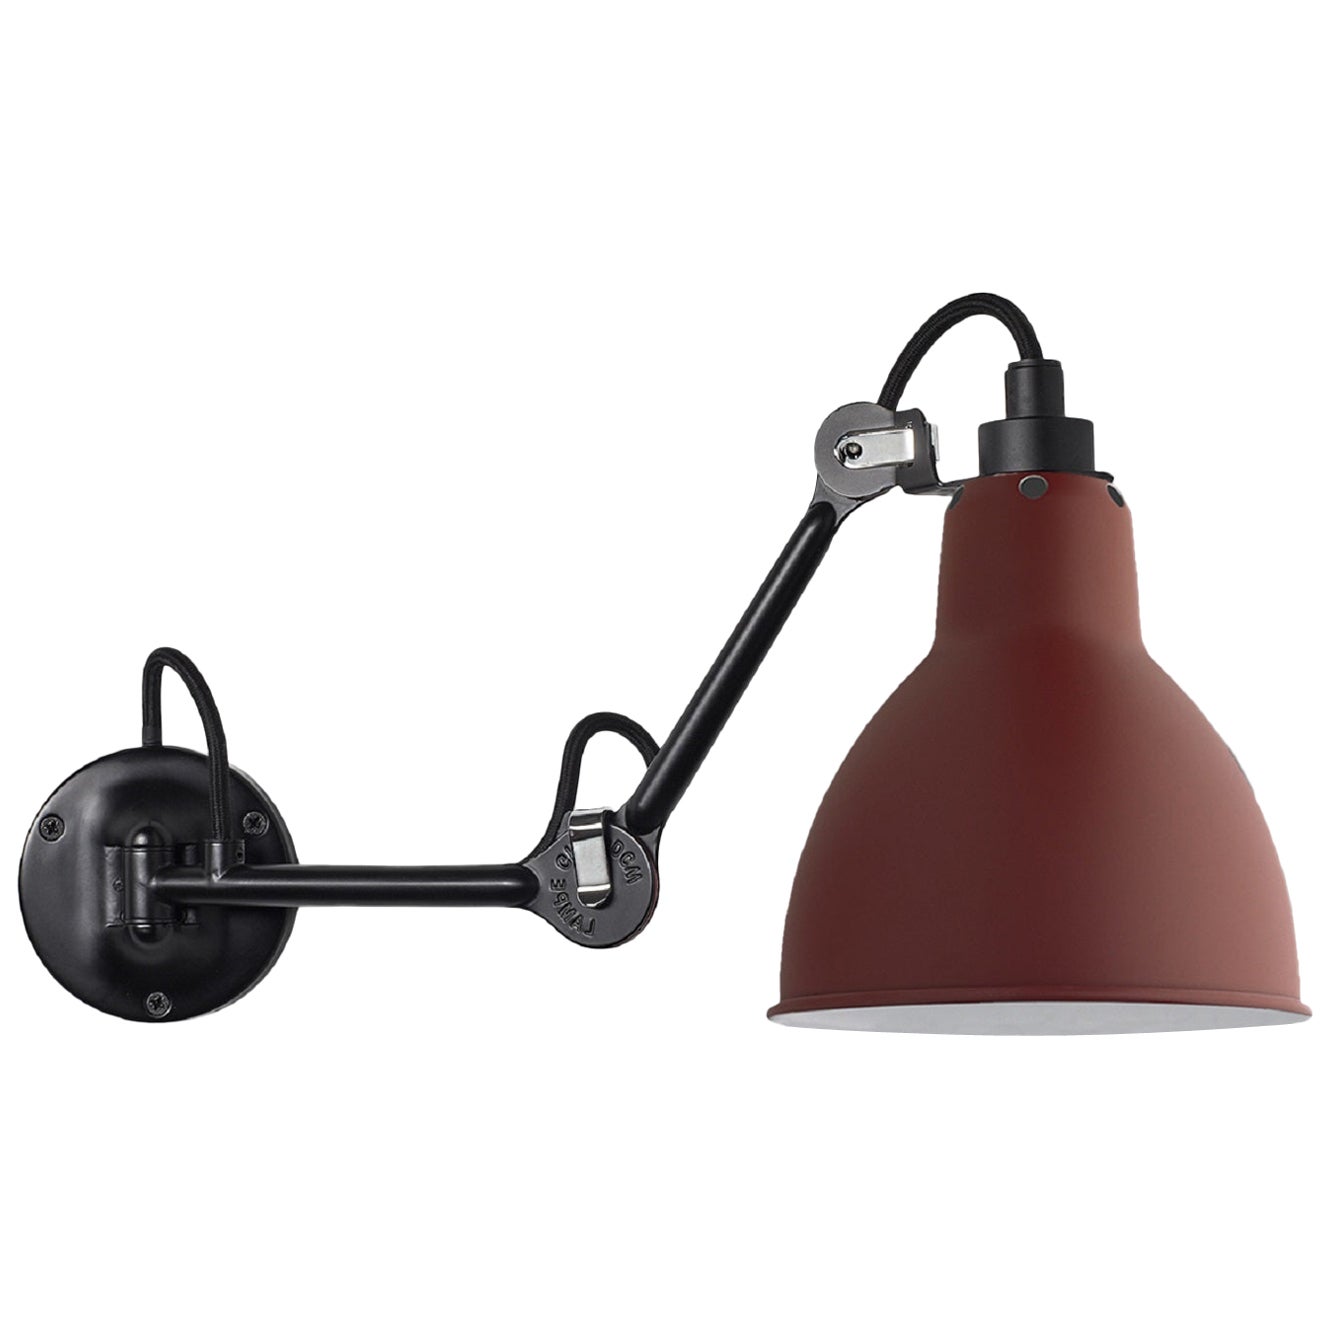 DCW Editions La Lampe Gras N°204 Wall Lamp in Black Steel Arm and Red Shade